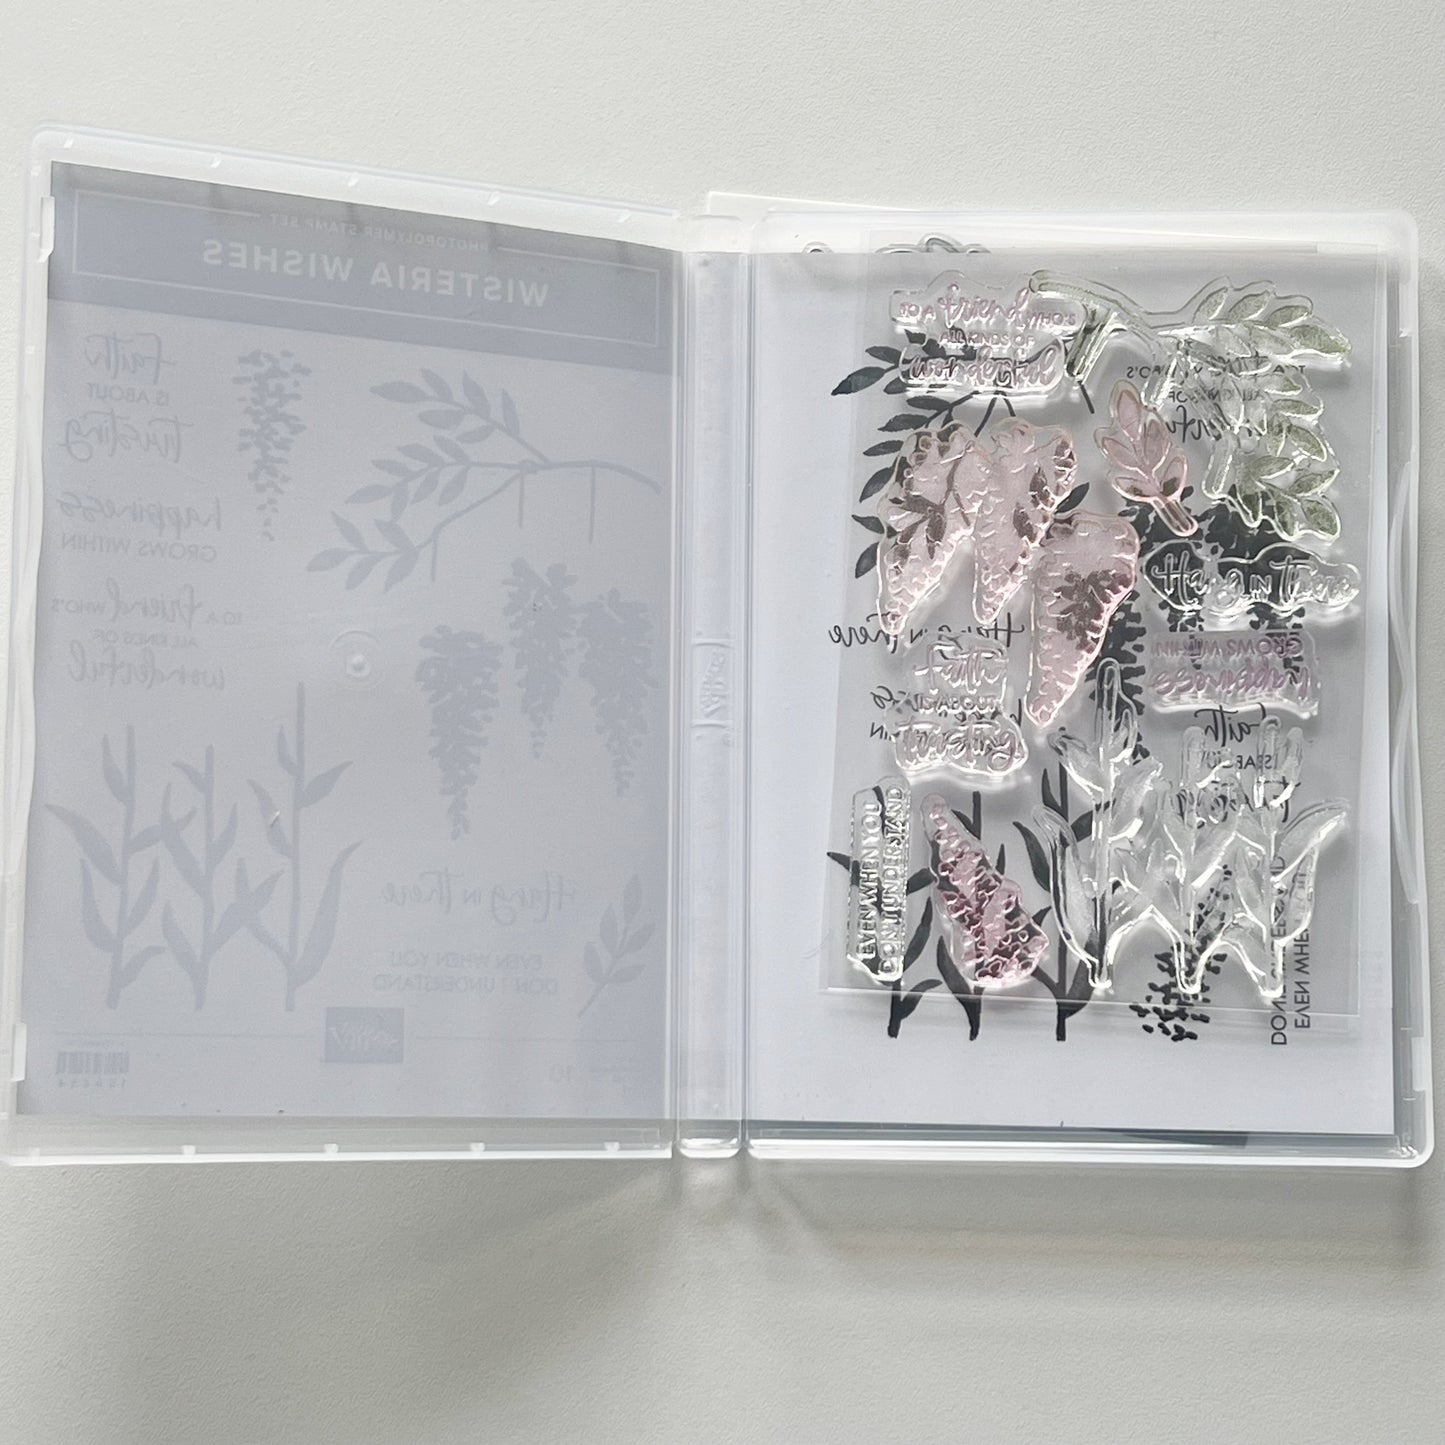 Stampin’ Up! Wisteria Wishes Stamp & Dies